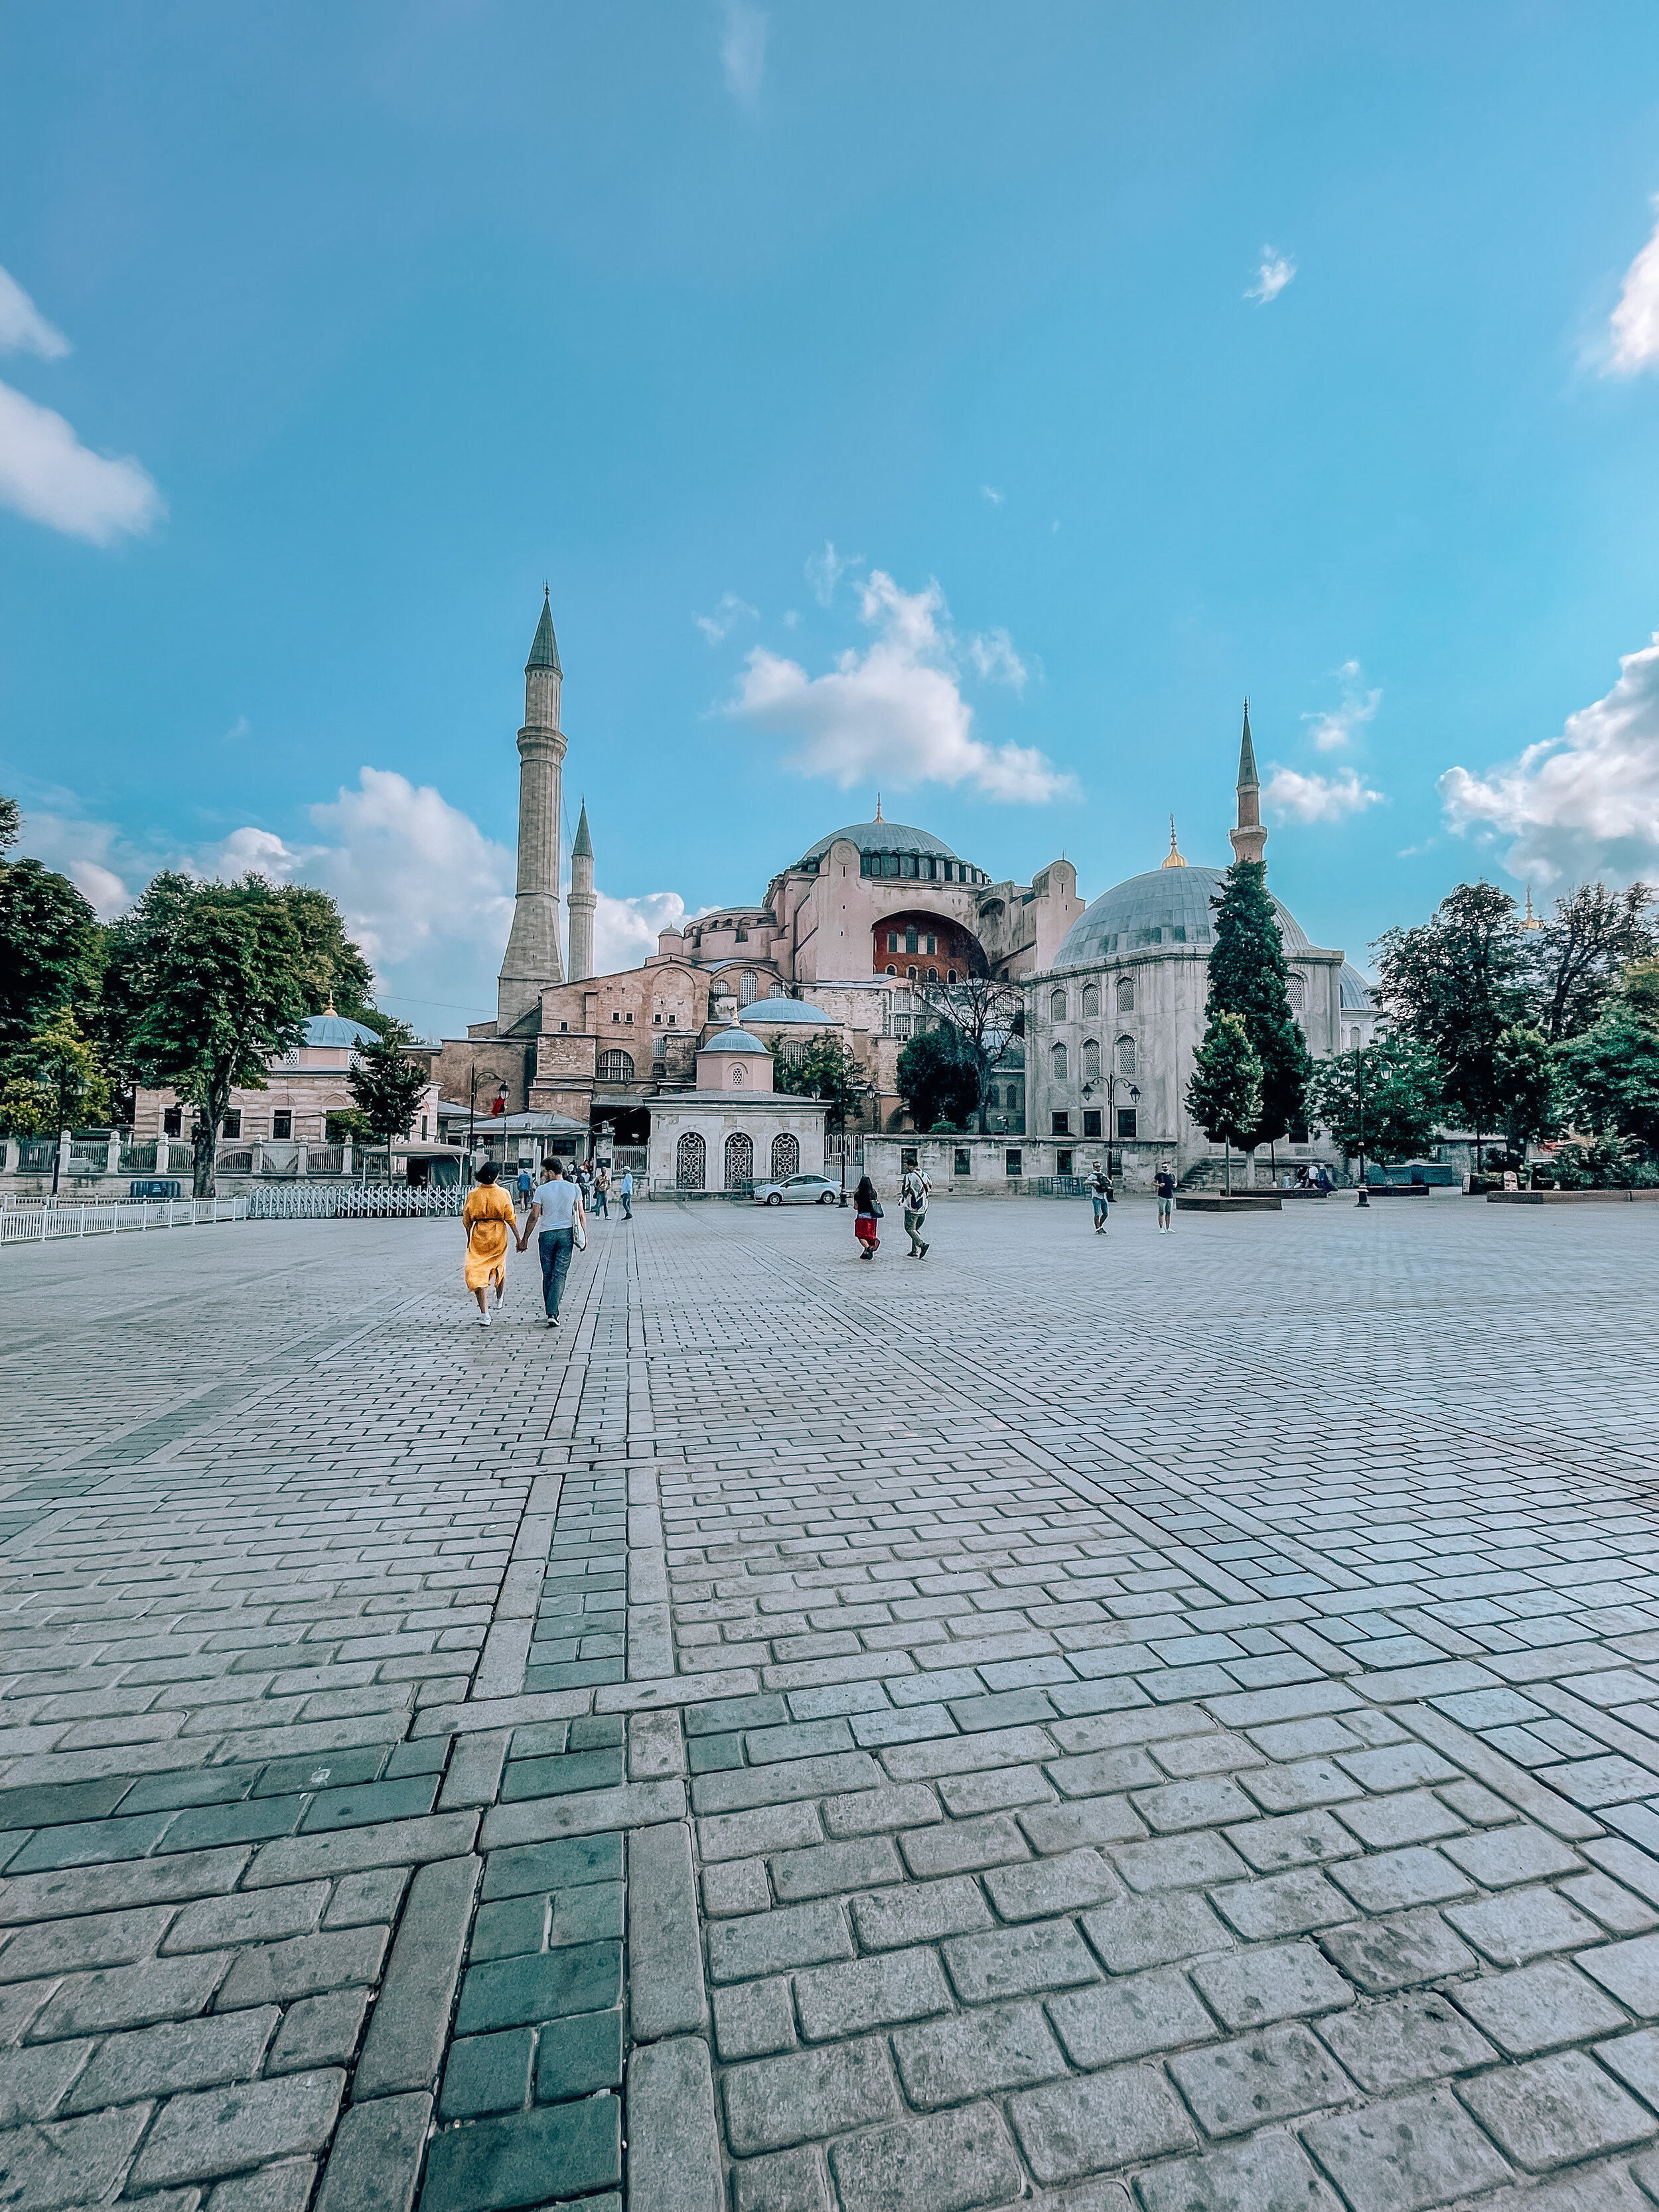 What to see in Istanbul - Hagia Sophia